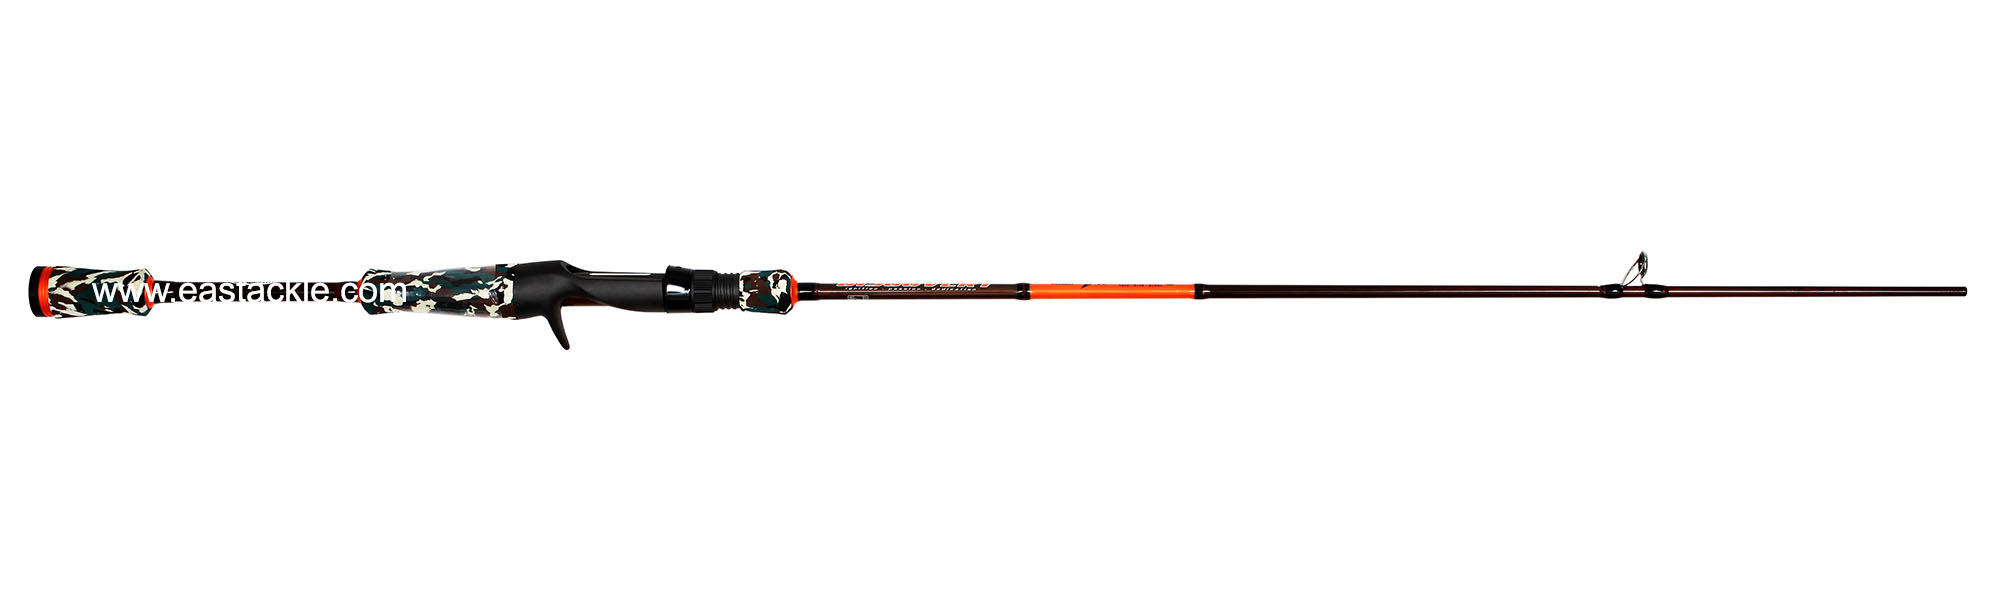 Storm - Discovery - DVC602L - Bait Casting Rod - Butt to Stripper Guide (Side View) | Eastackle